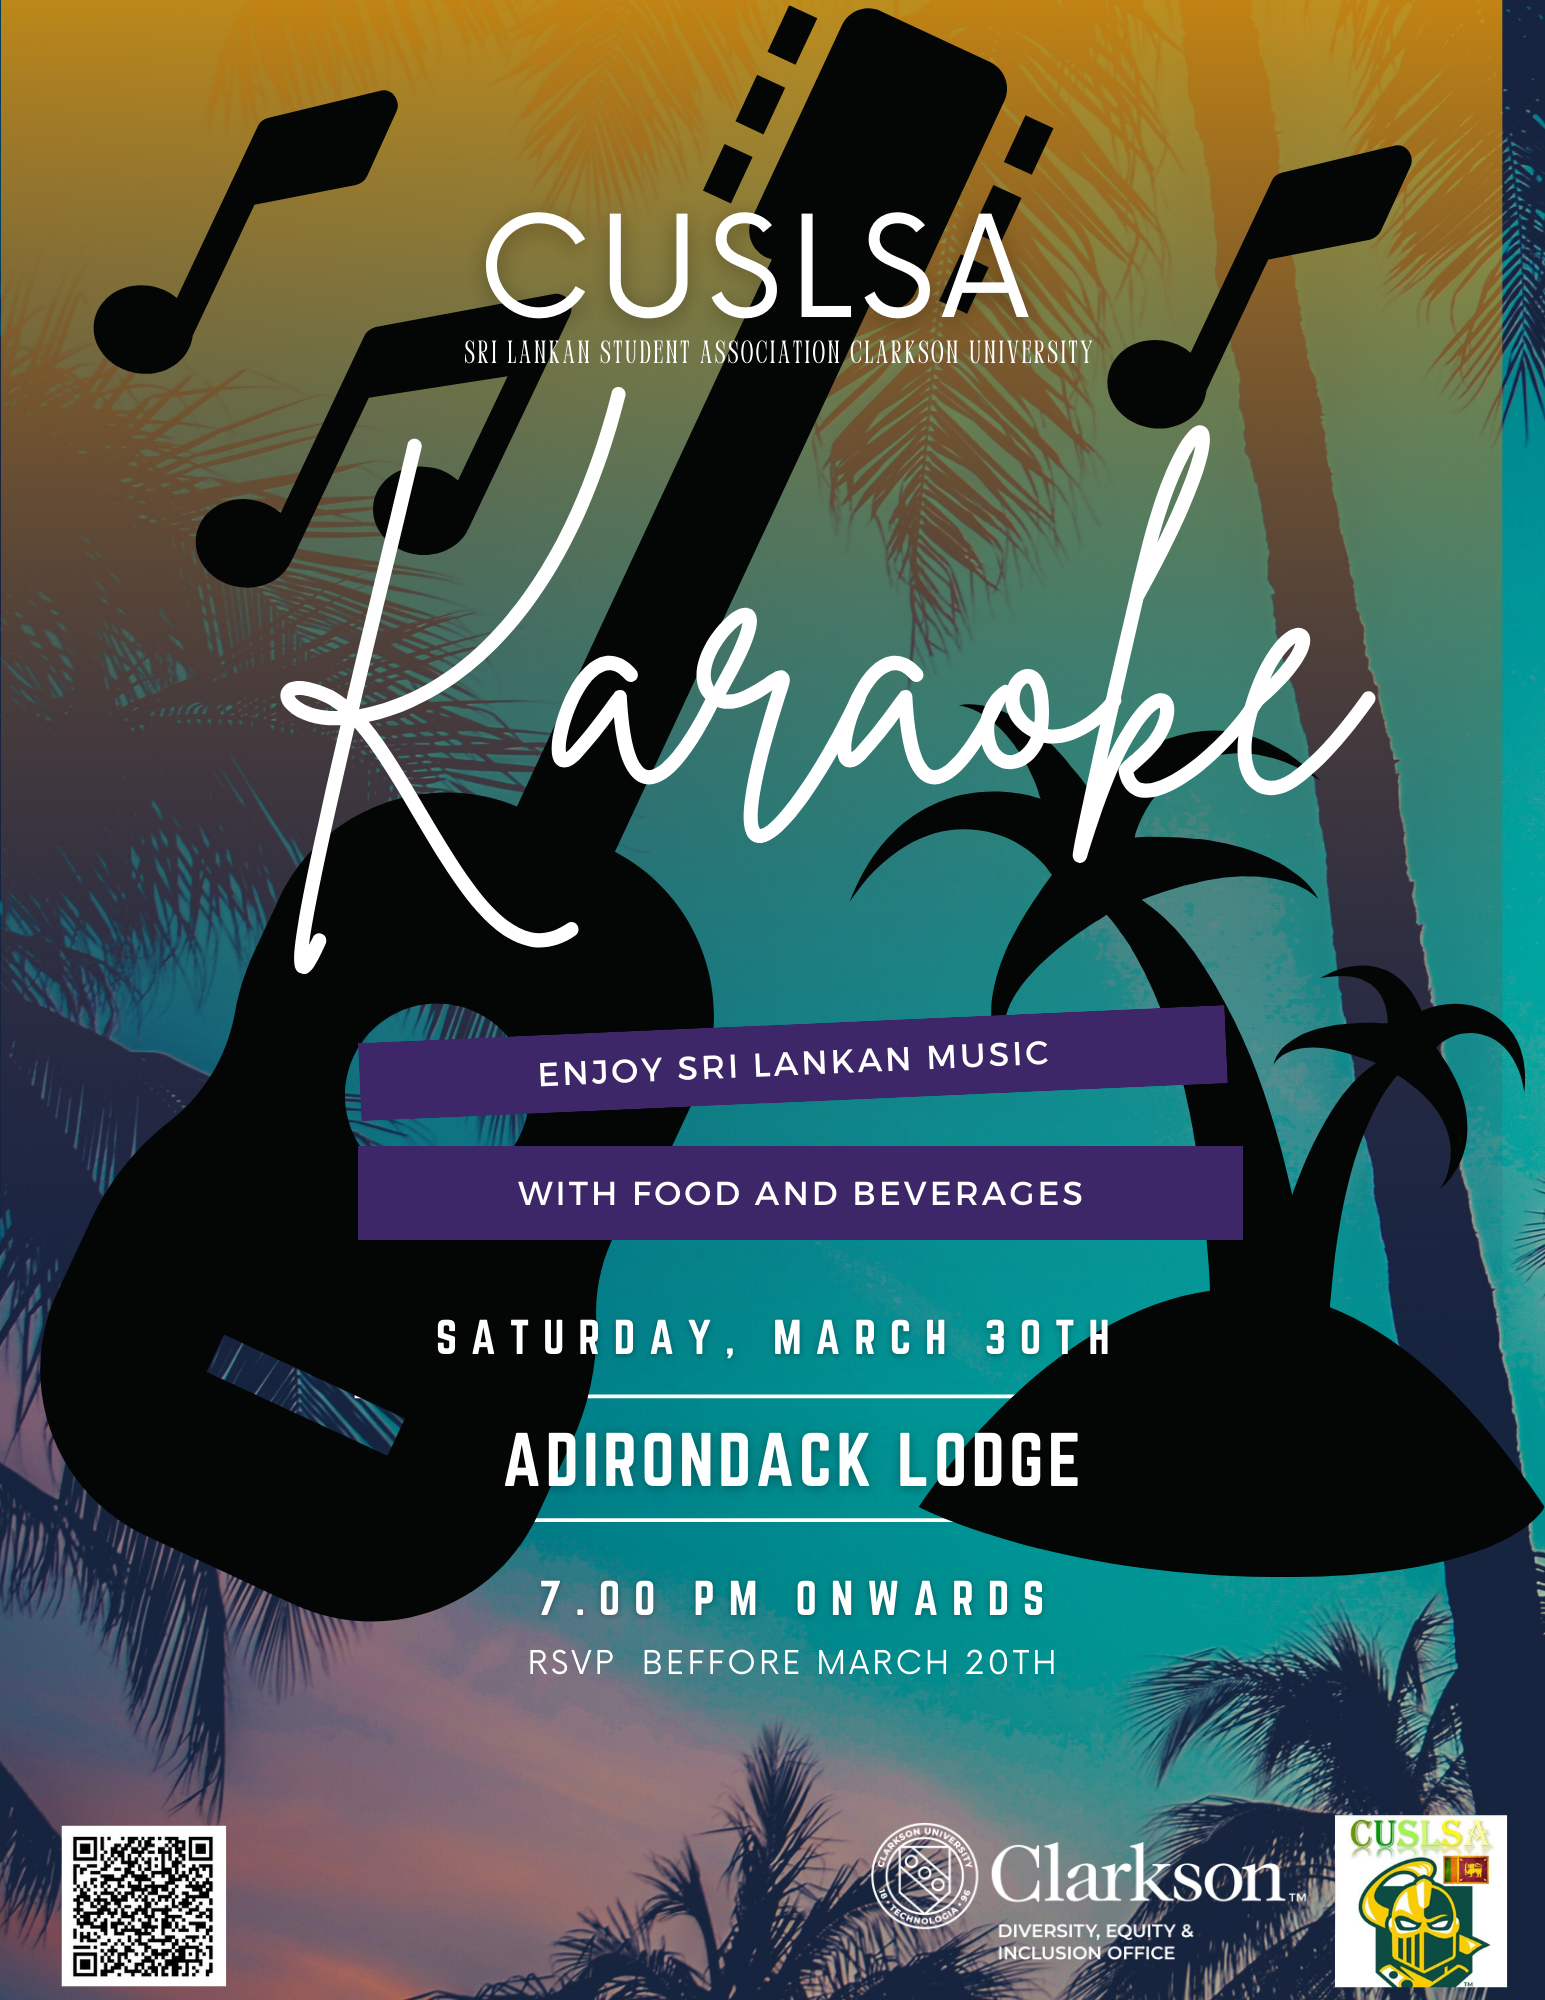 CUSLSA Karaoke Enjoy Sri Lankan Music with Food and Beverages Event details: Date : 30th (Saturday) March 2024 Venue : Adirondack Lounge, Clarkson University Time : 7.00 PM onwards RSVP before 20th March 2024 Rsvp link : https://forms.gle/EBdmtpAmRi8ZiXWq7